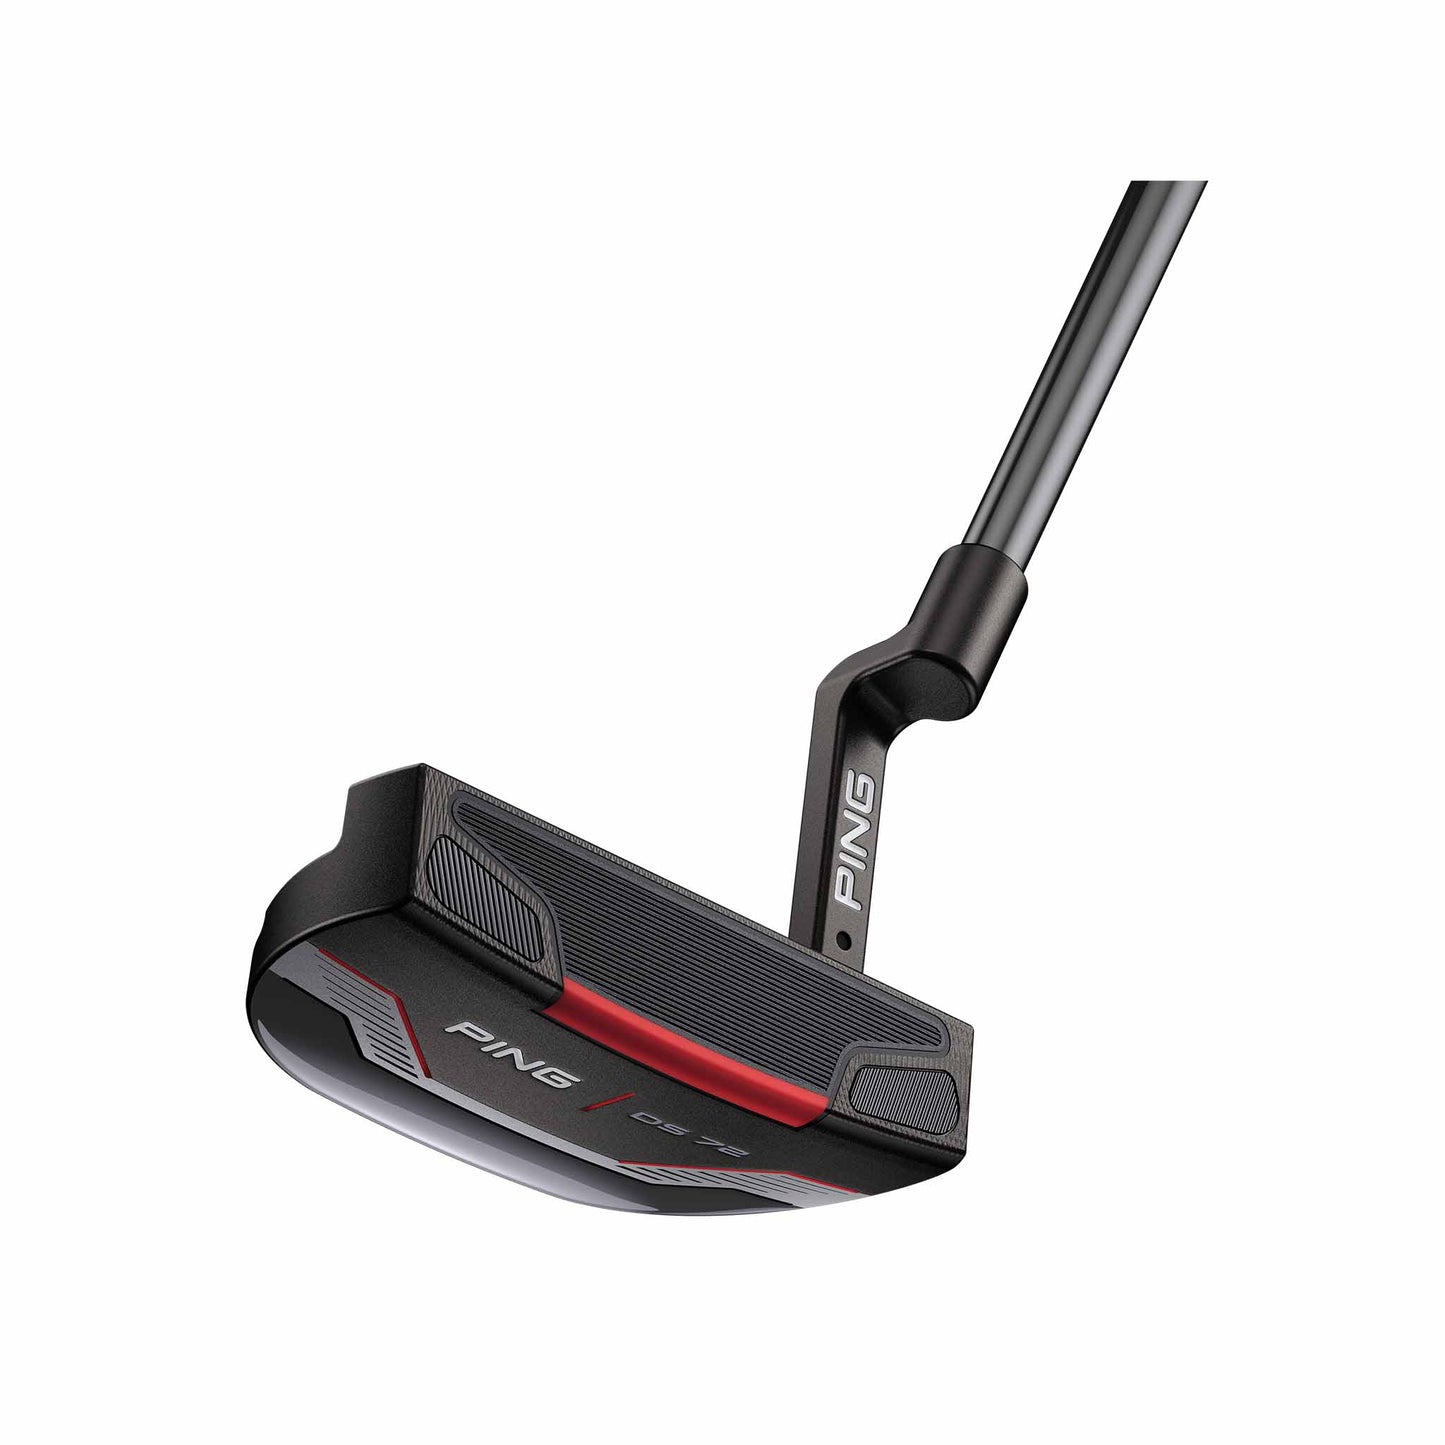 Ping DS 72 putteri